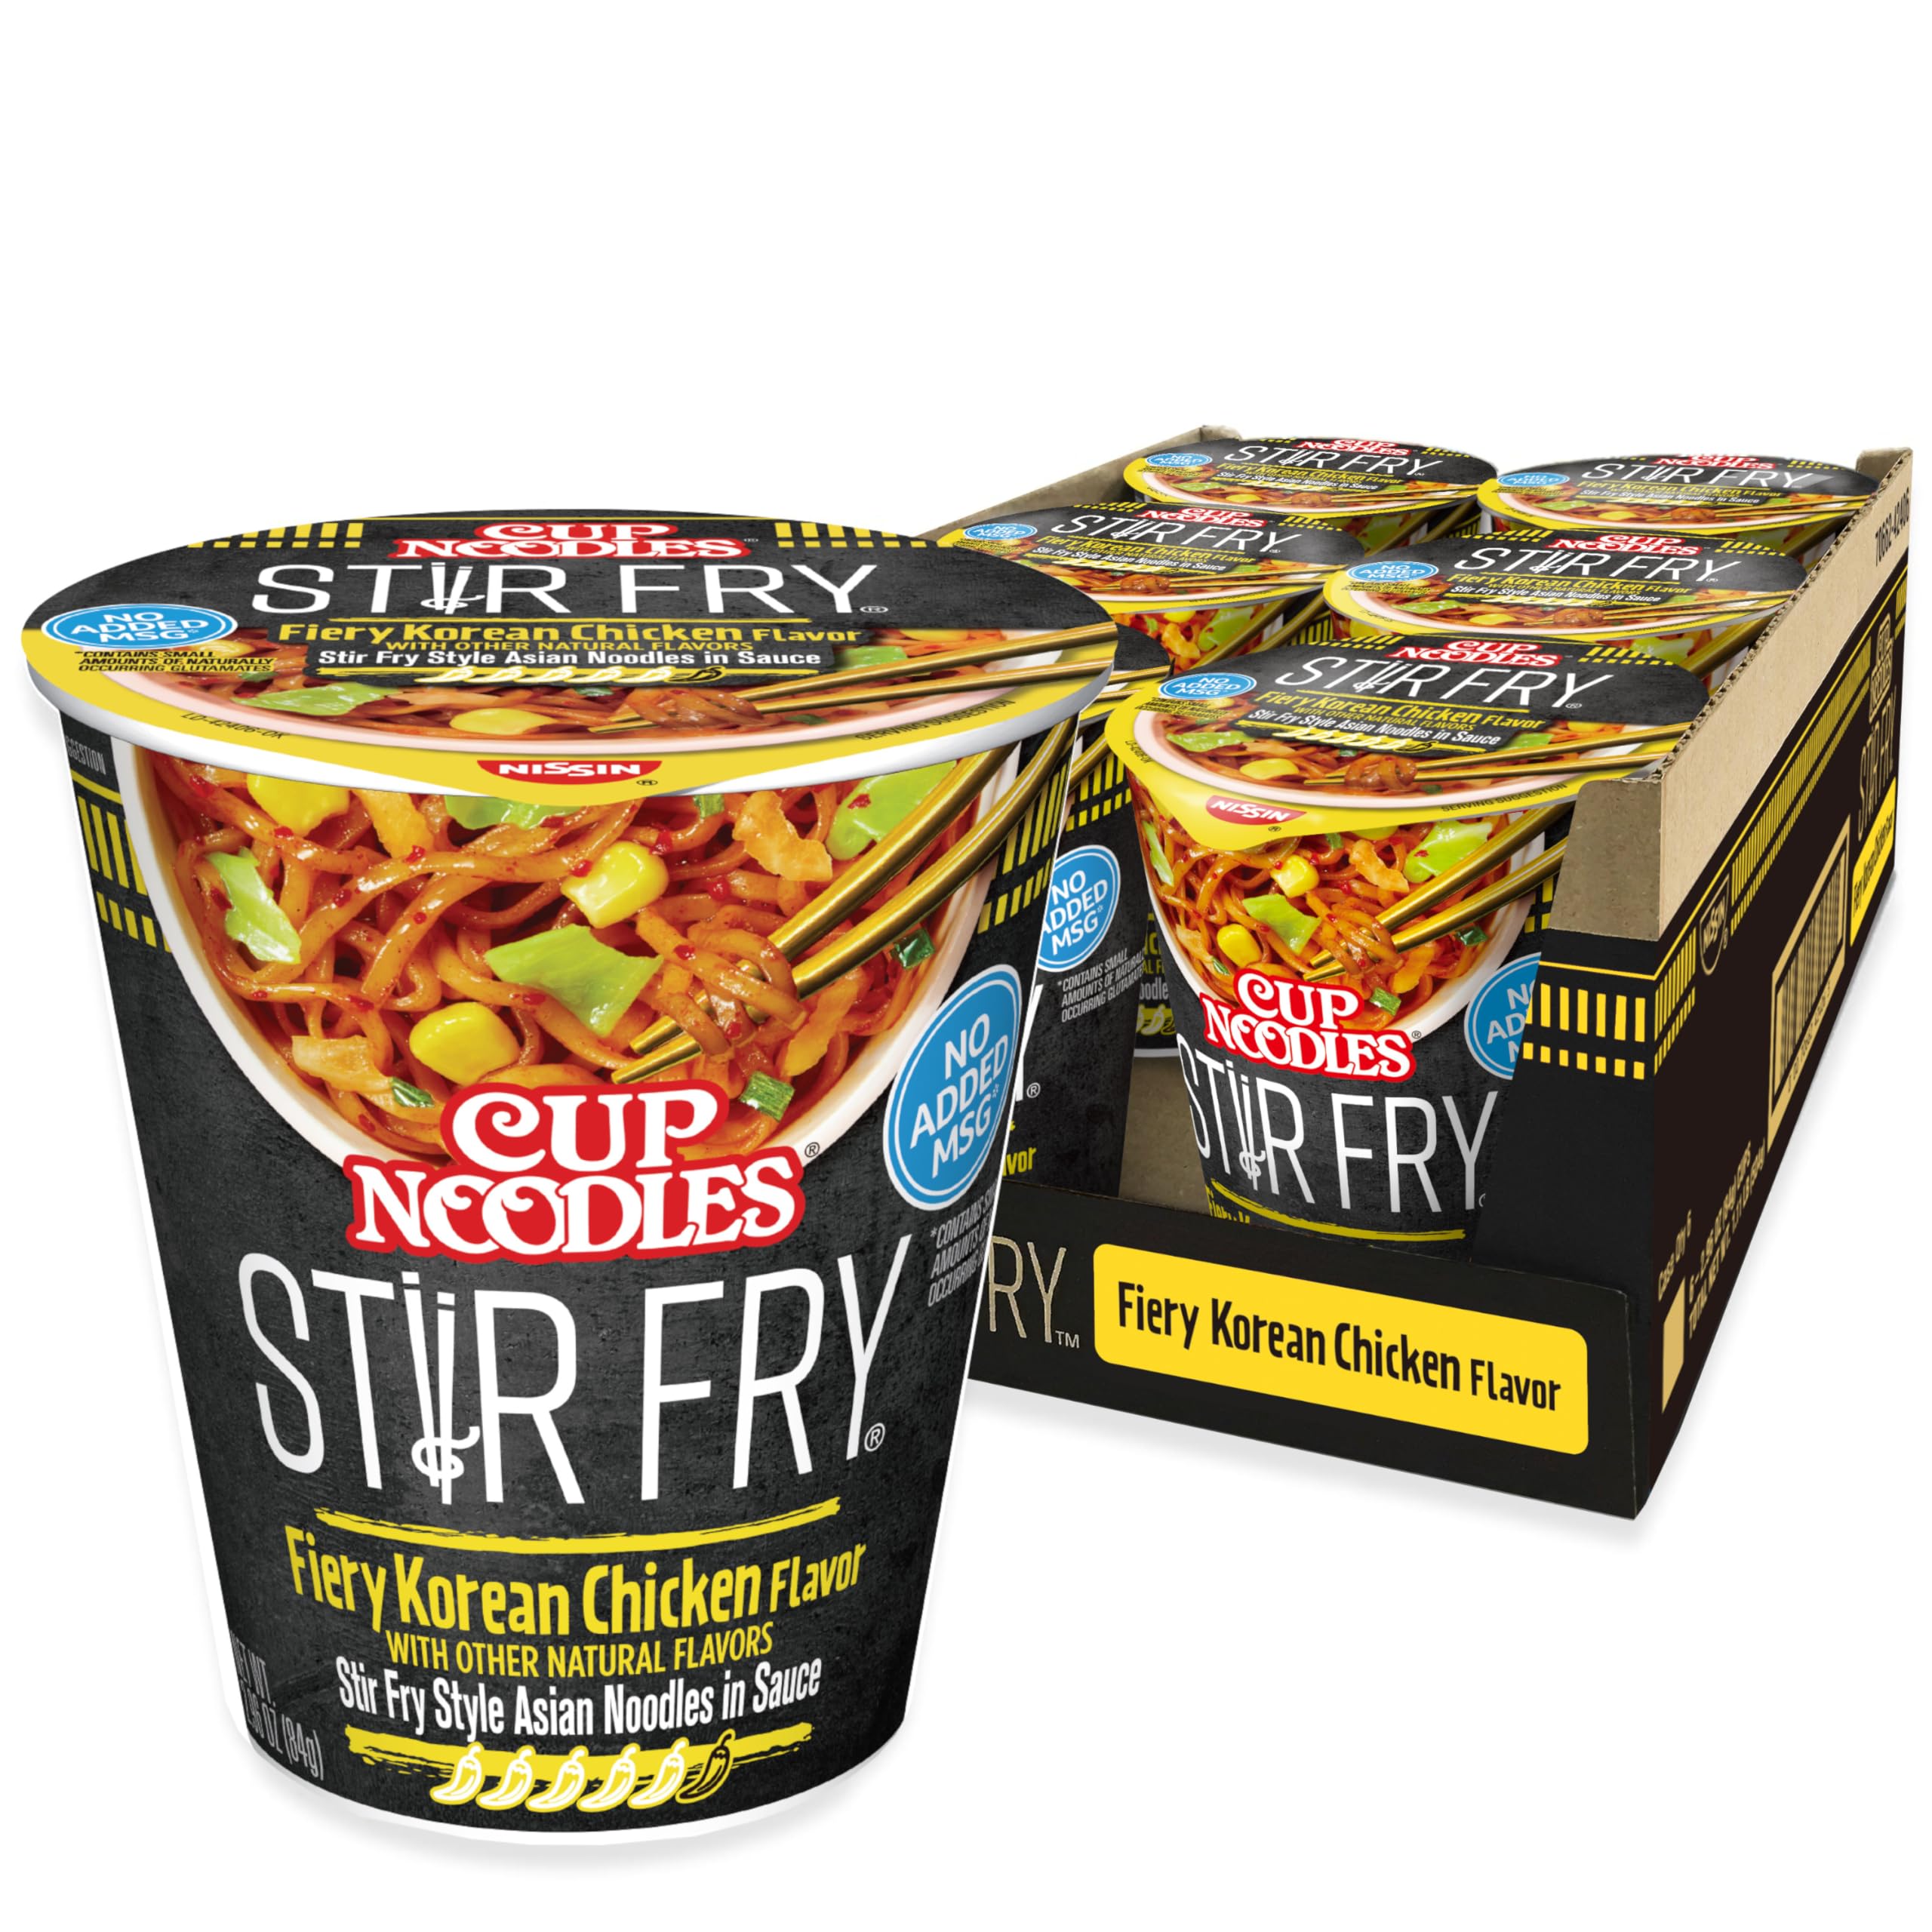 6-Pack 2.96-Oz Nissin Cup Noodles Stir Fry Noodles in Sauce (Fiery Chicken or Sweet Chili) $5.99 w/ S&S + Free Shipping w/ Prime or on $35+